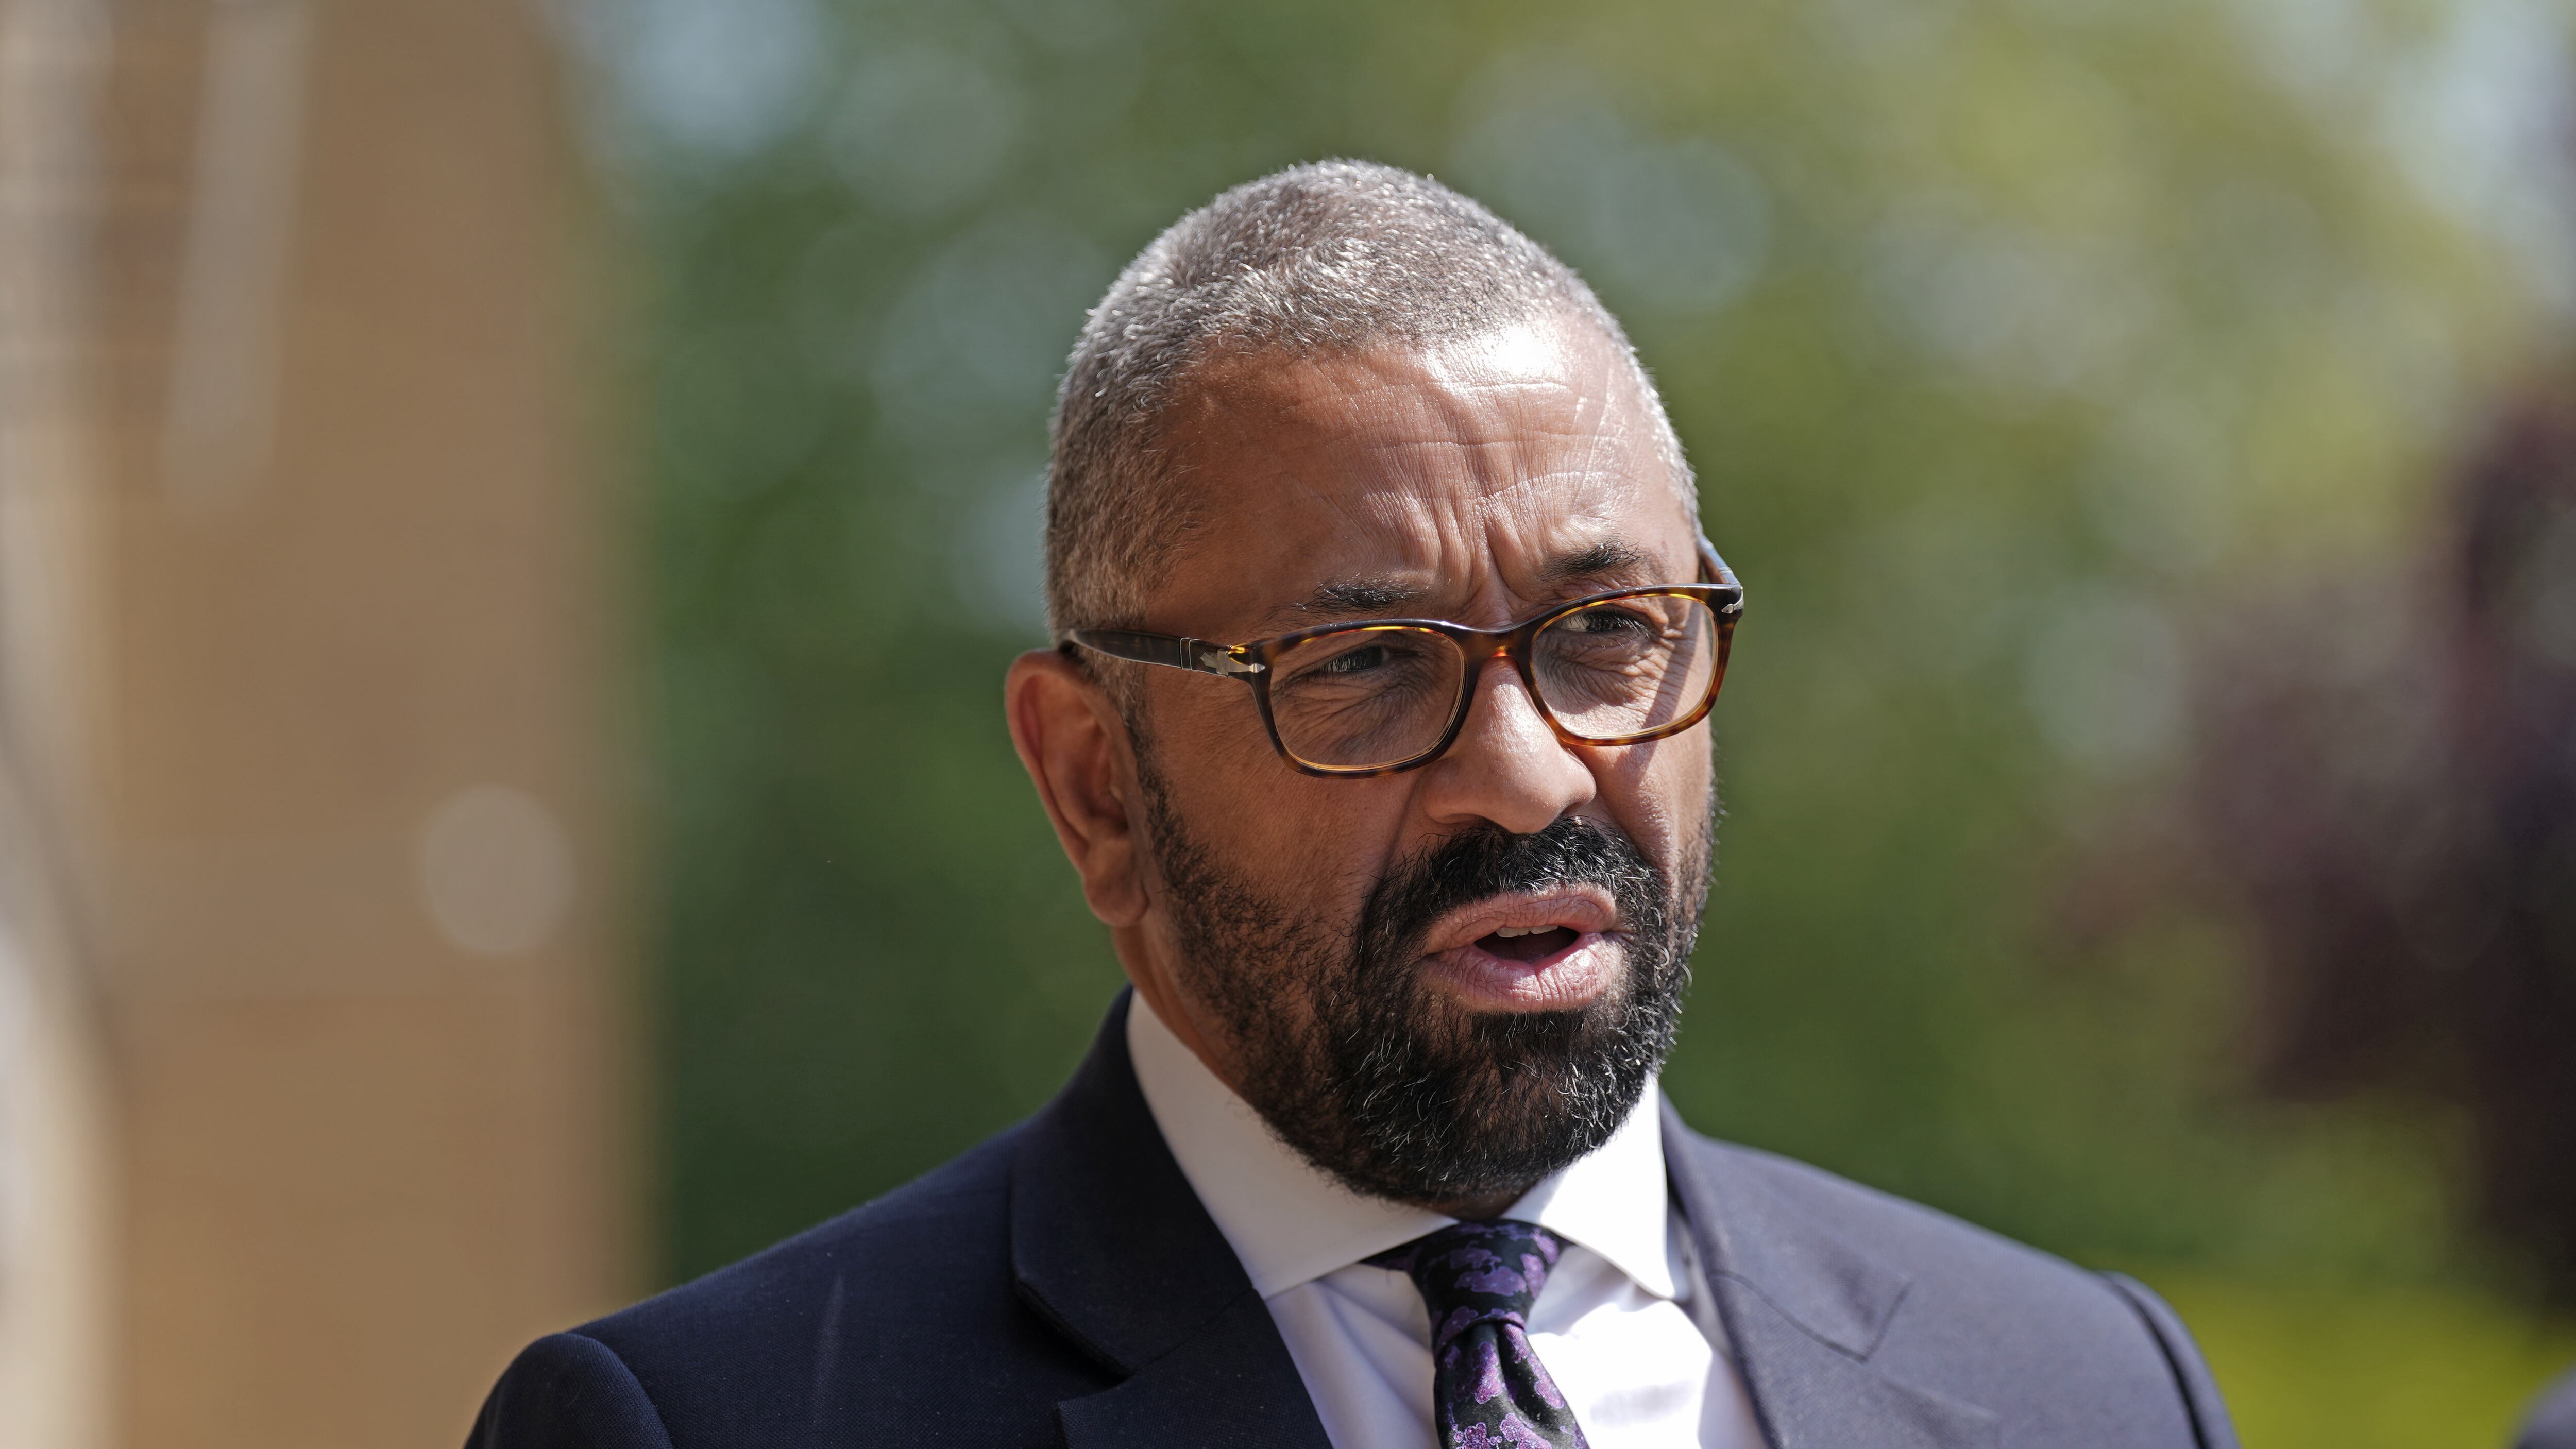 James Cleverly hailed the latest provisional data on student and foreign care worker visa applications